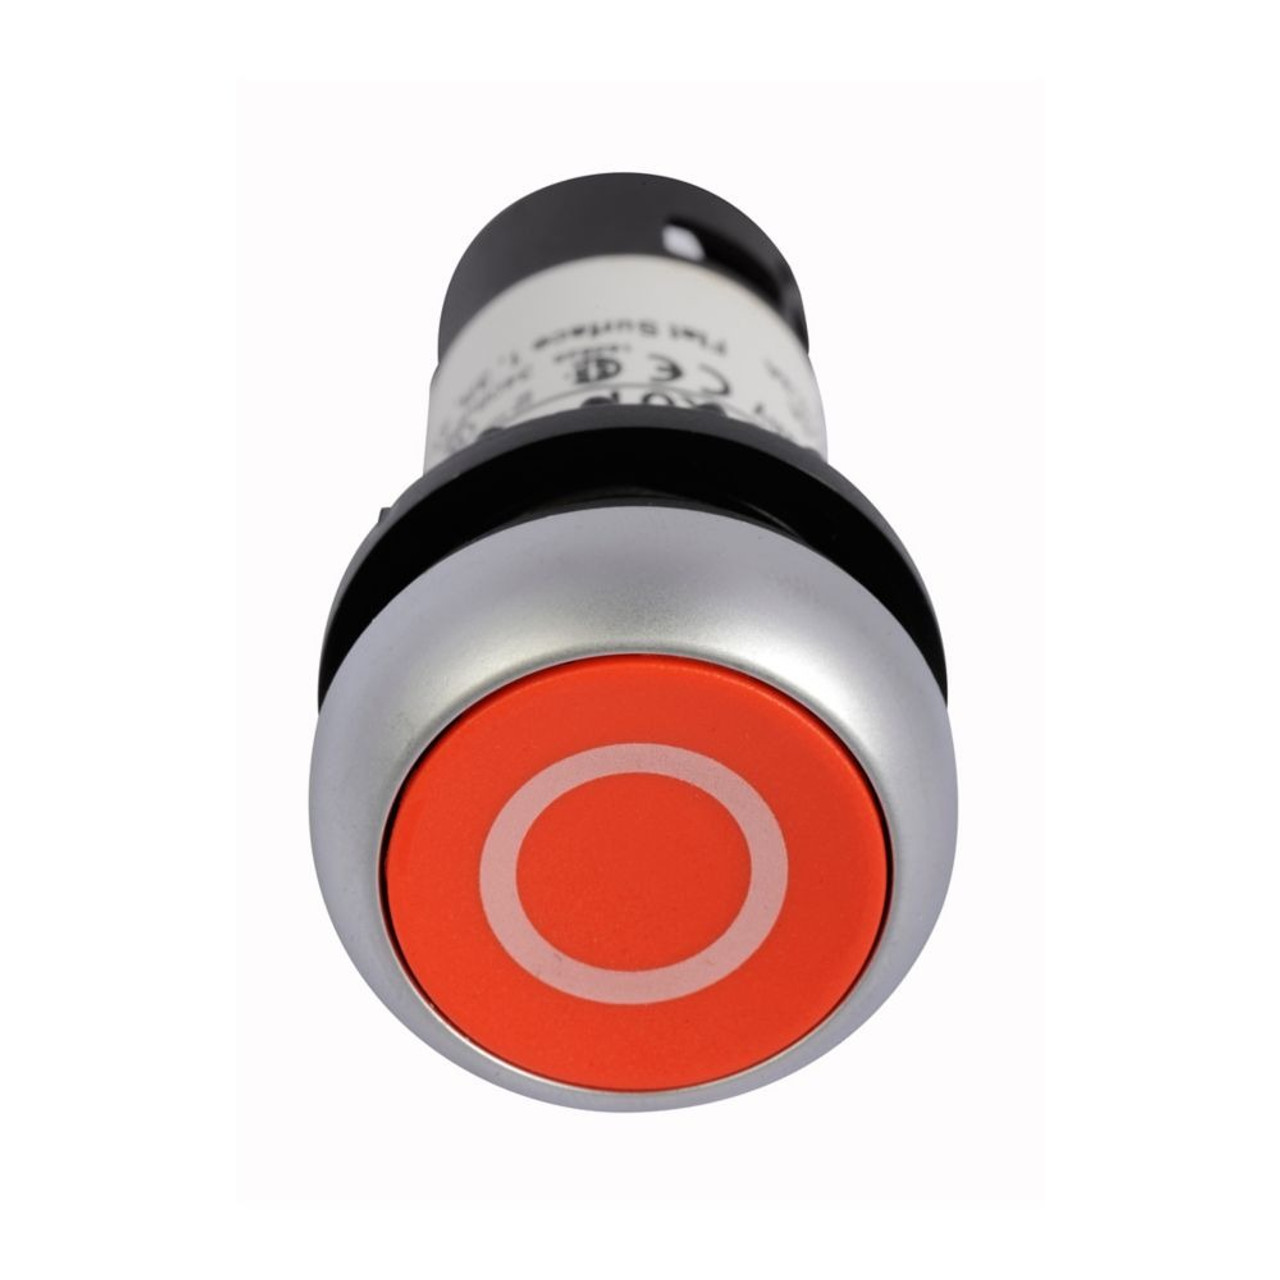 Eaton C22-D-R-X0-K11 22.5 mm RQM Compact Pushbutton, Etching X0, Red [New]